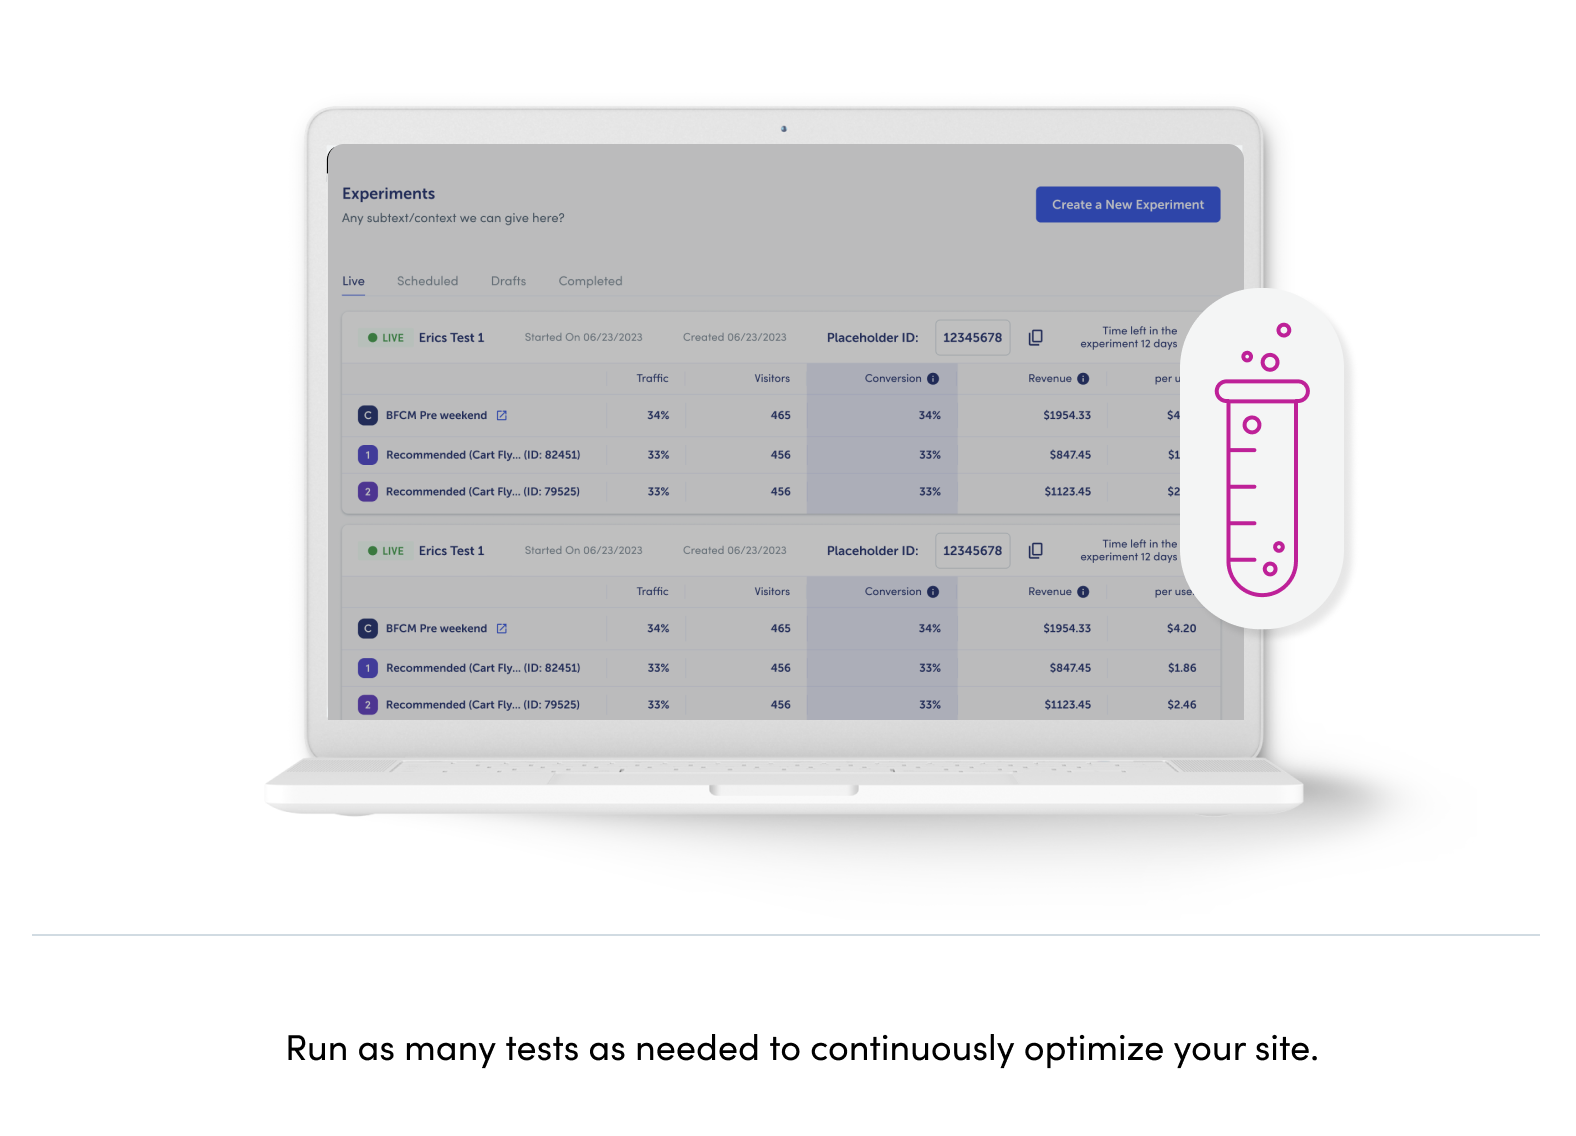 Run as many tests as needed to continuously optimize your site.